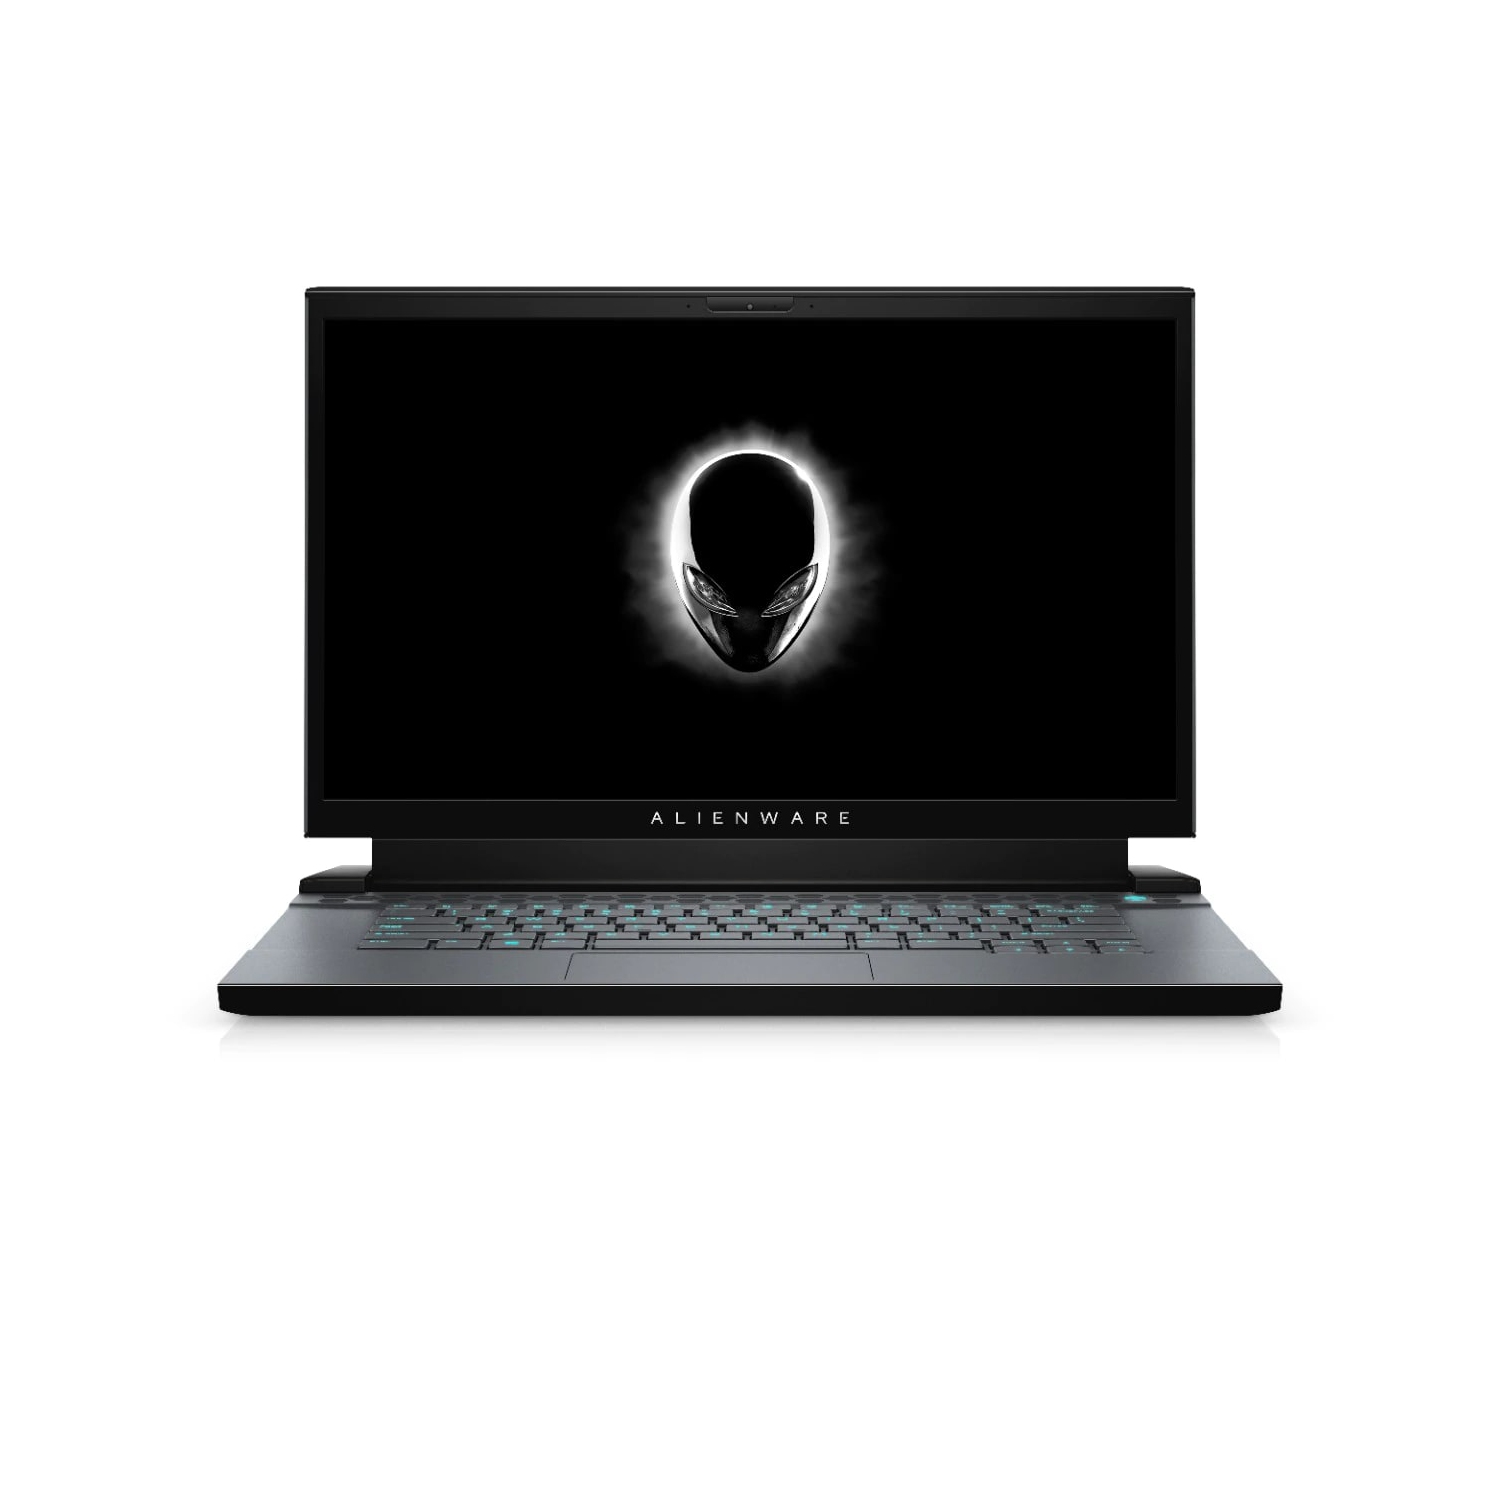 Refurbished (Excellent) - Dell Alienware m15 R2 Gaming Laptop (2019) | 15.6" FHD | Core i7 - 512GB SSD - 8GB RAM - RTX 2070 | 6 Cores @ 4.5 GHz Certified Refurbished